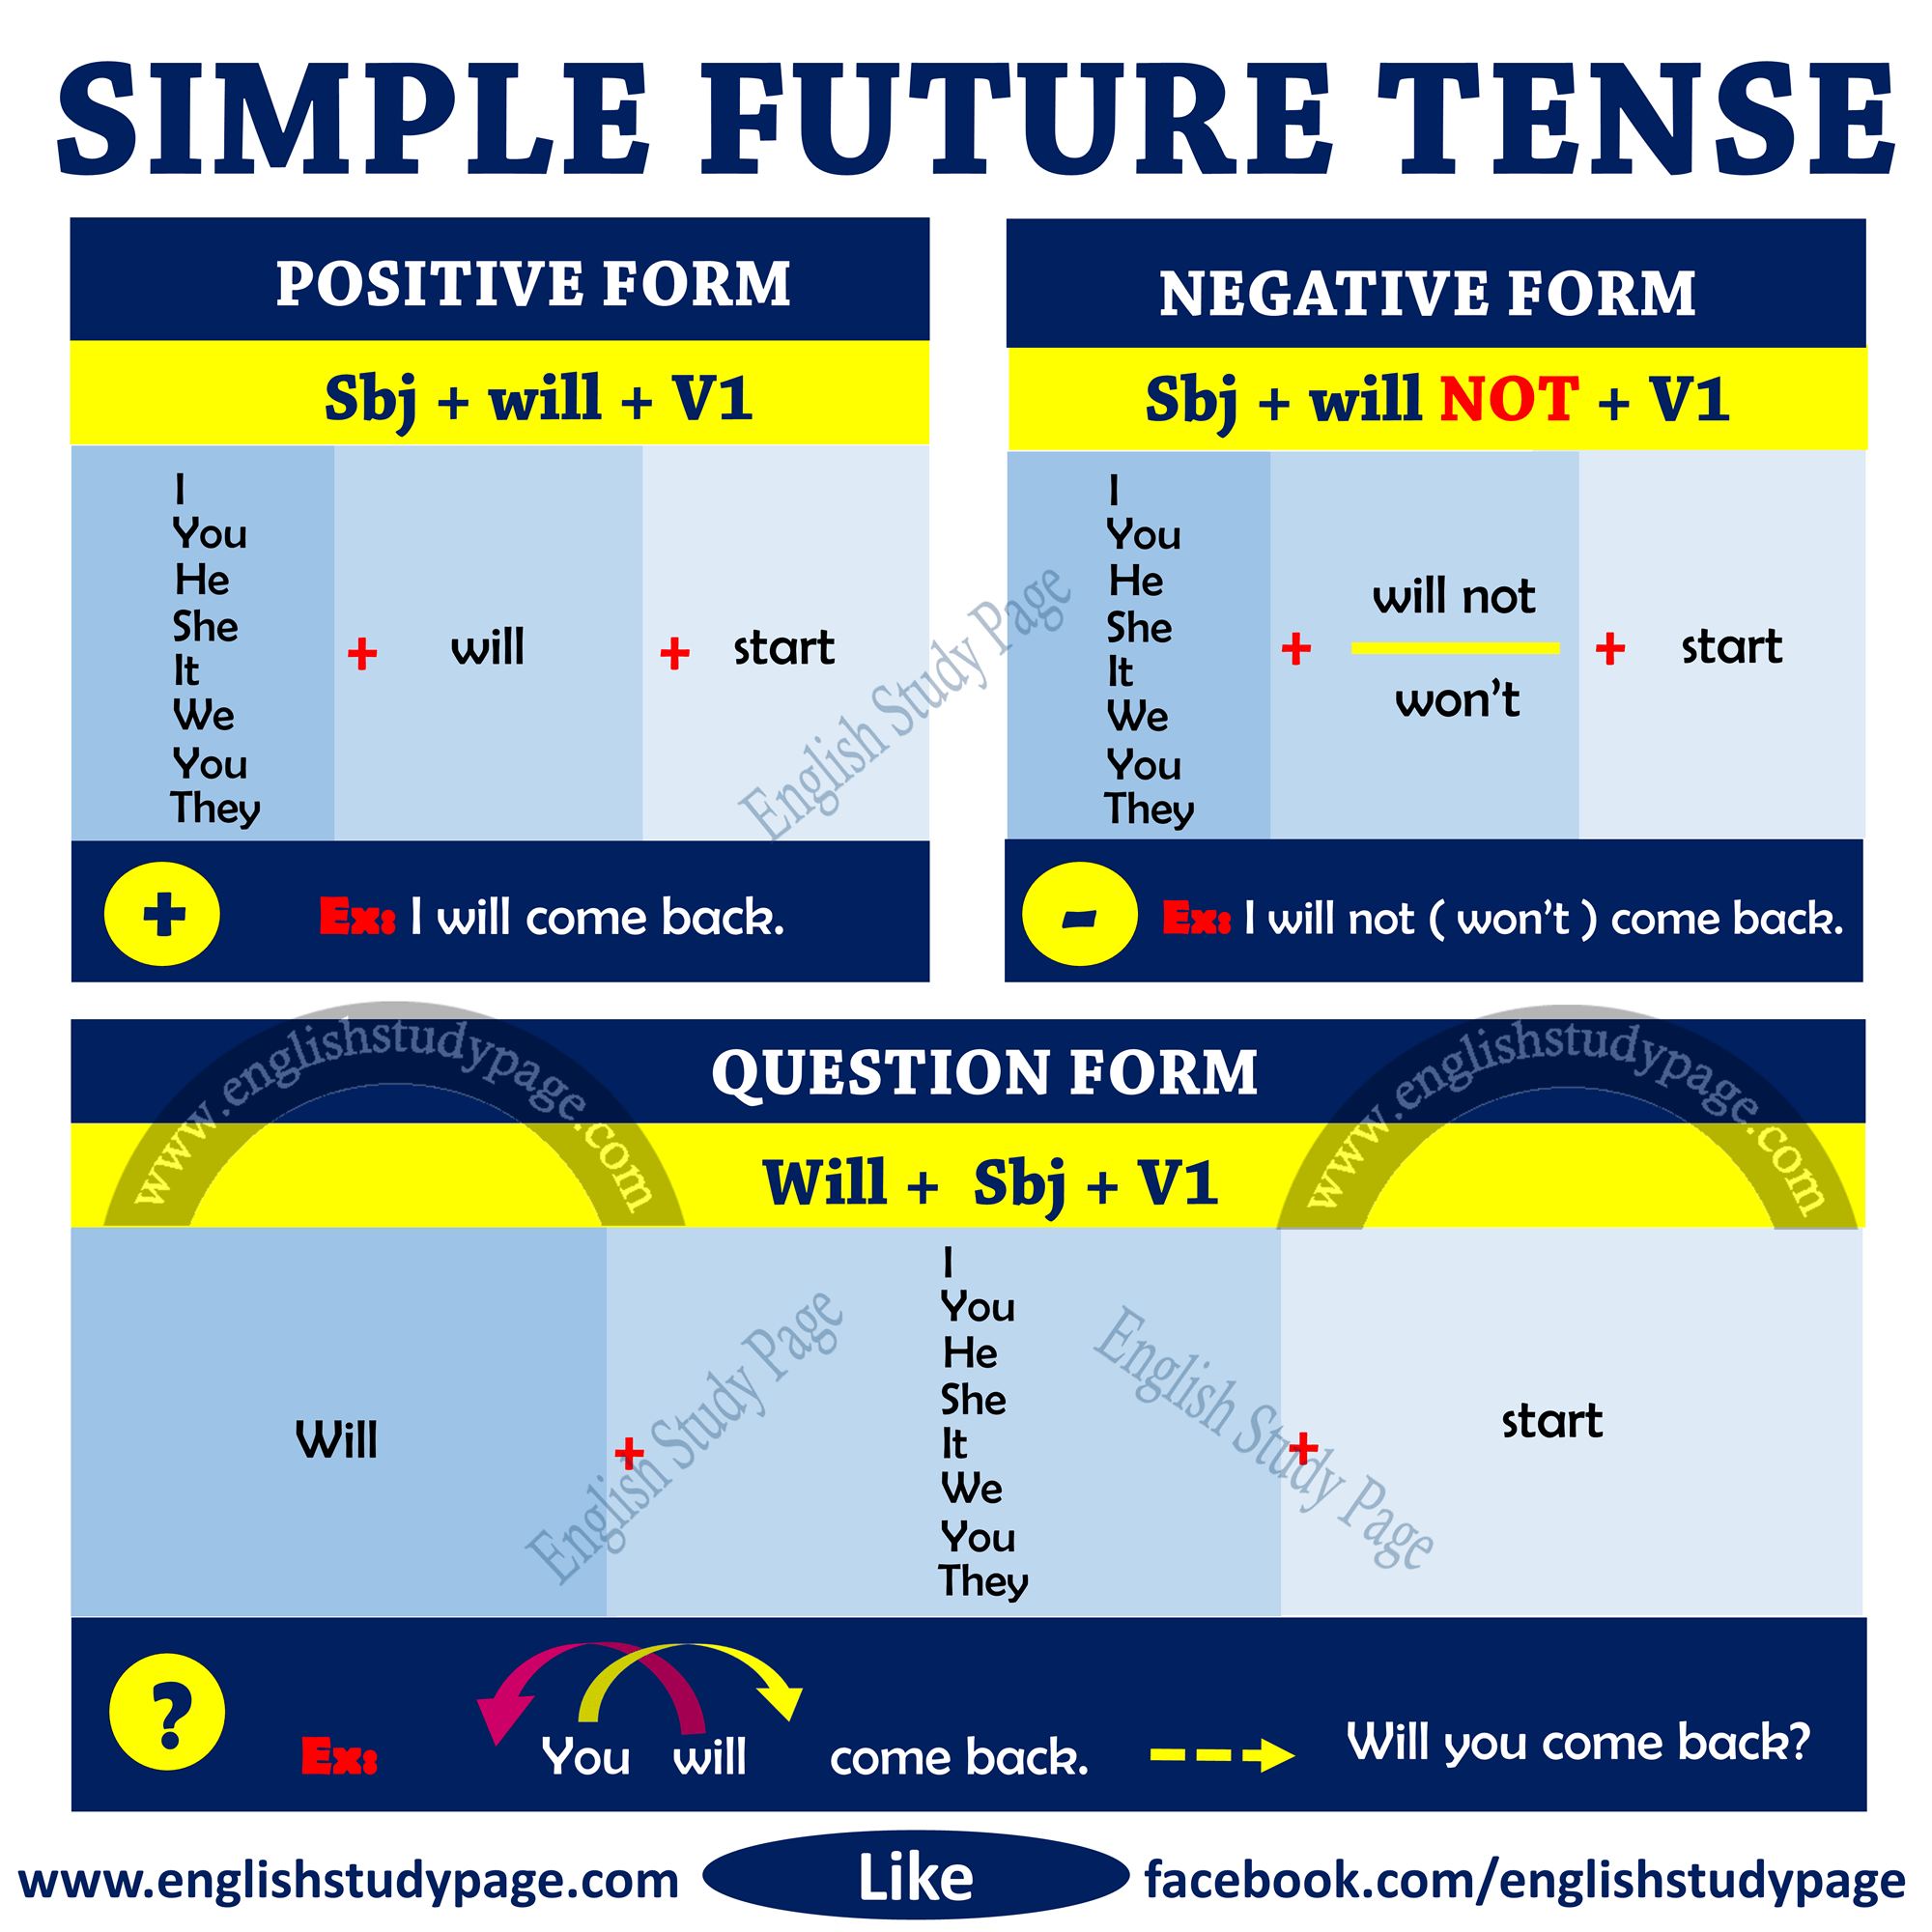 Structure of Simple Future Tense - English Study Page
